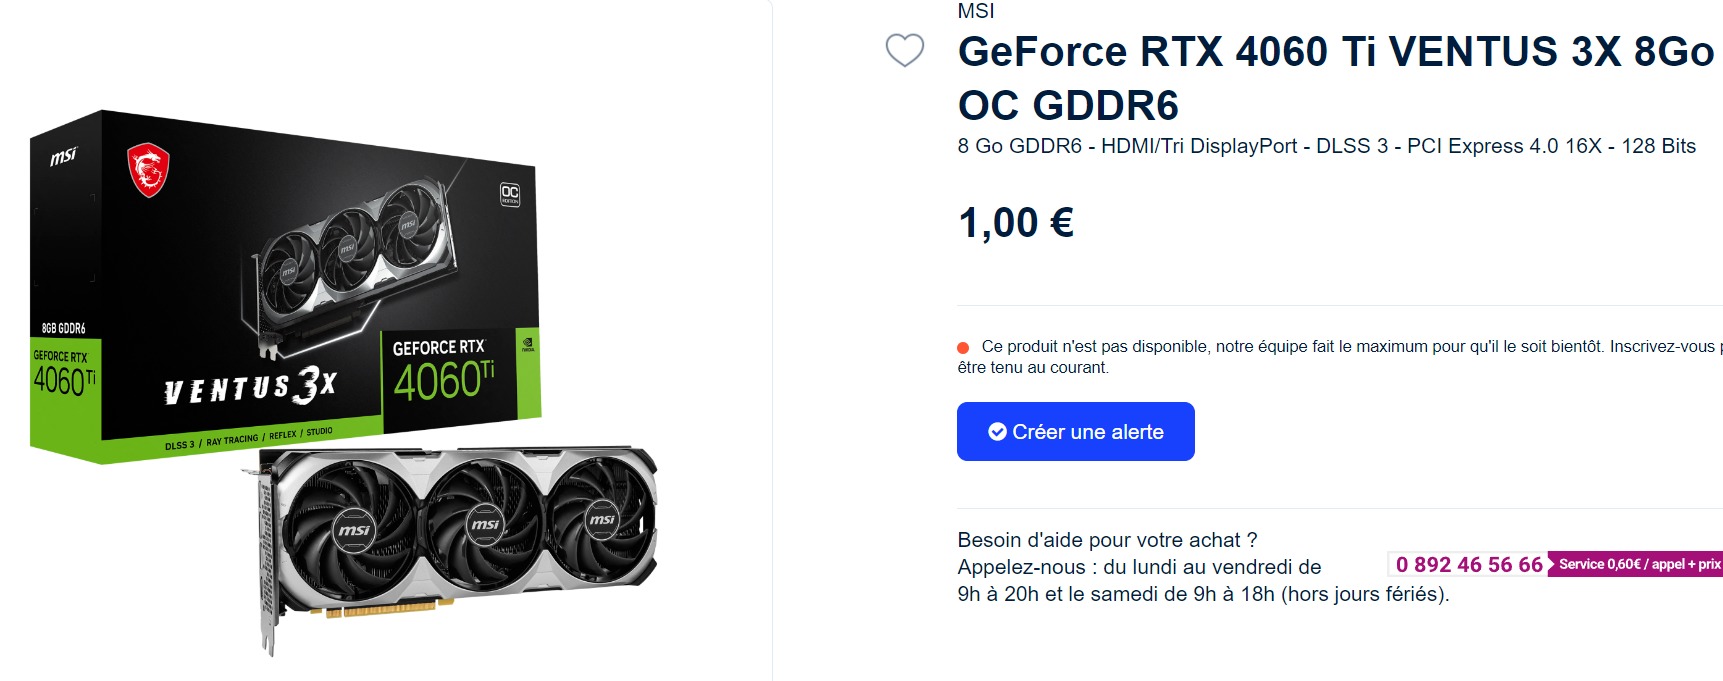 NVIDIA GeForce RTX 4060 Ti 8 GB Rumored To Cost Same As 3060 Ti $399 US, 16  GB For $499 US